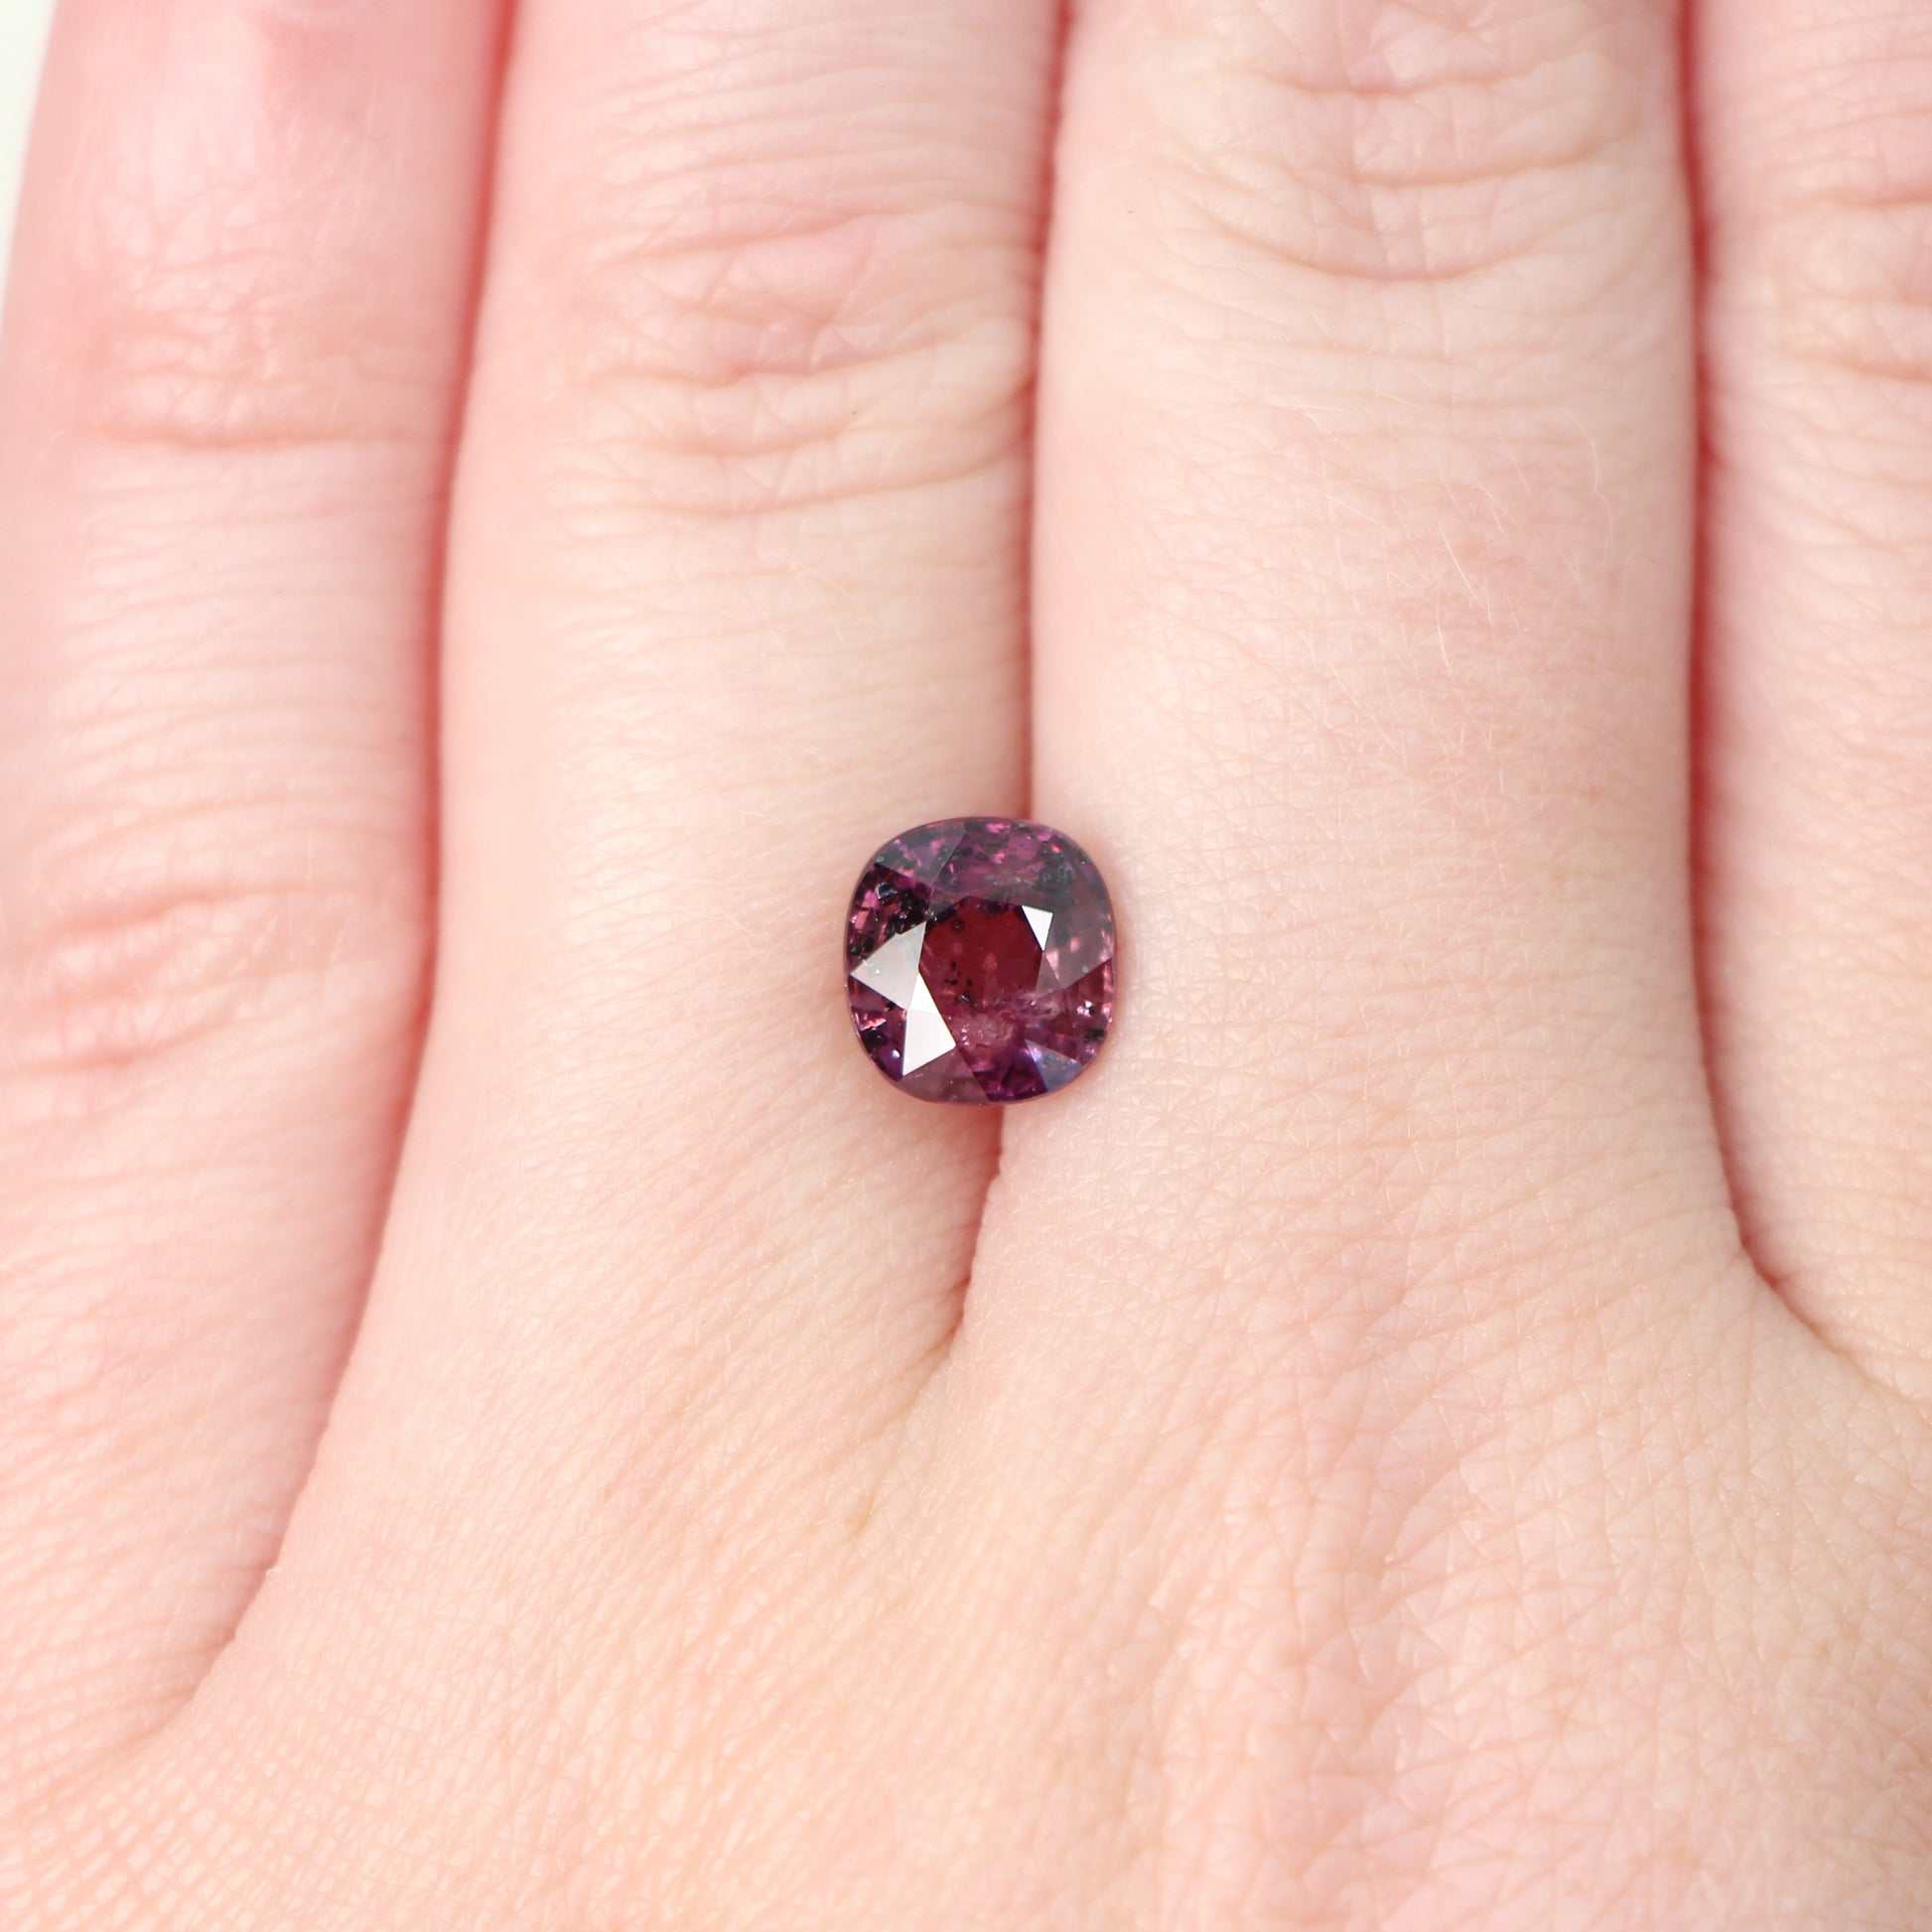 2.72 Carat Dark Magenta Red Cushion Cut Sapphire for Custom Work - Inventory Code PRCR272 - Midwinter Co. Alternative Bridal Rings and Modern Fine Jewelry